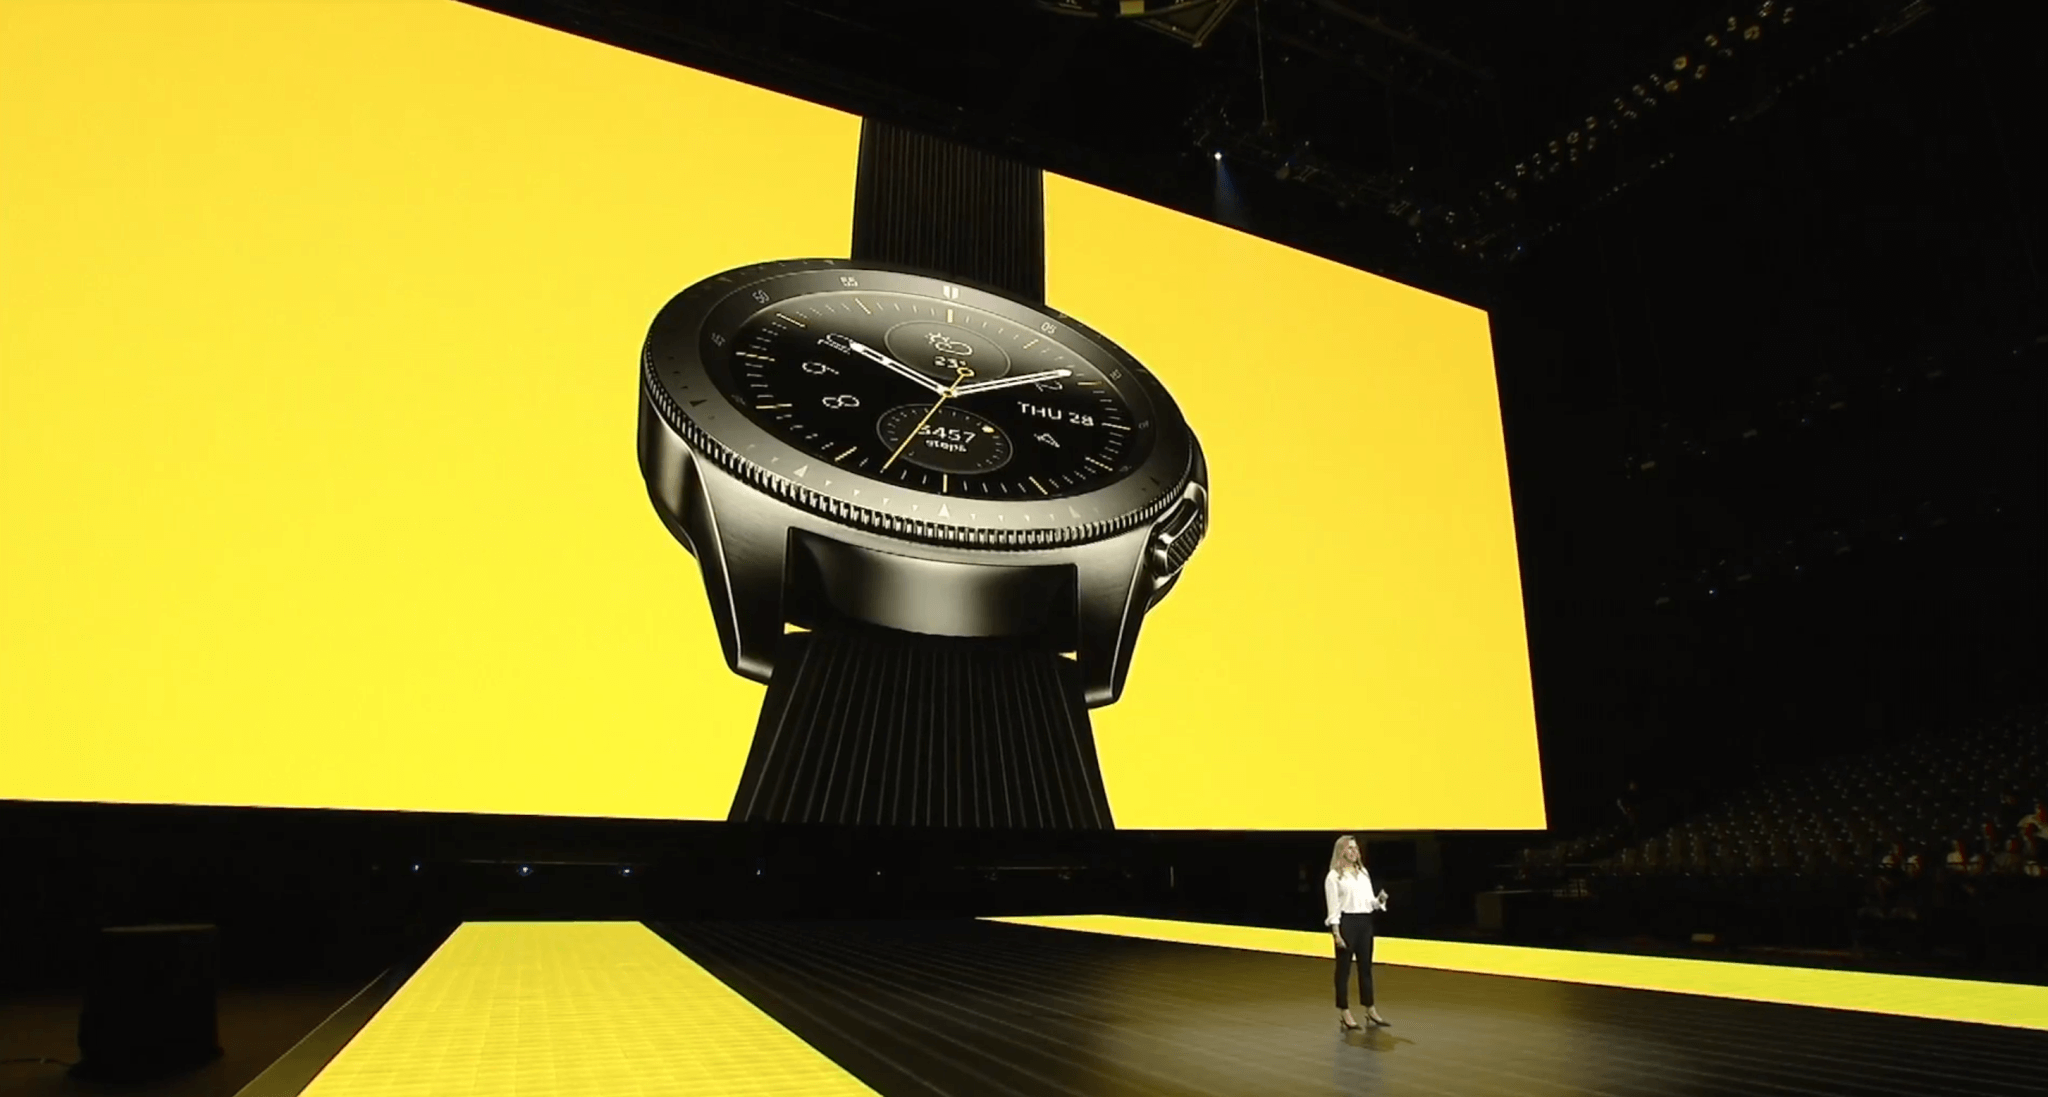 Galaxy Watch promises more than 80 hours of autonomy